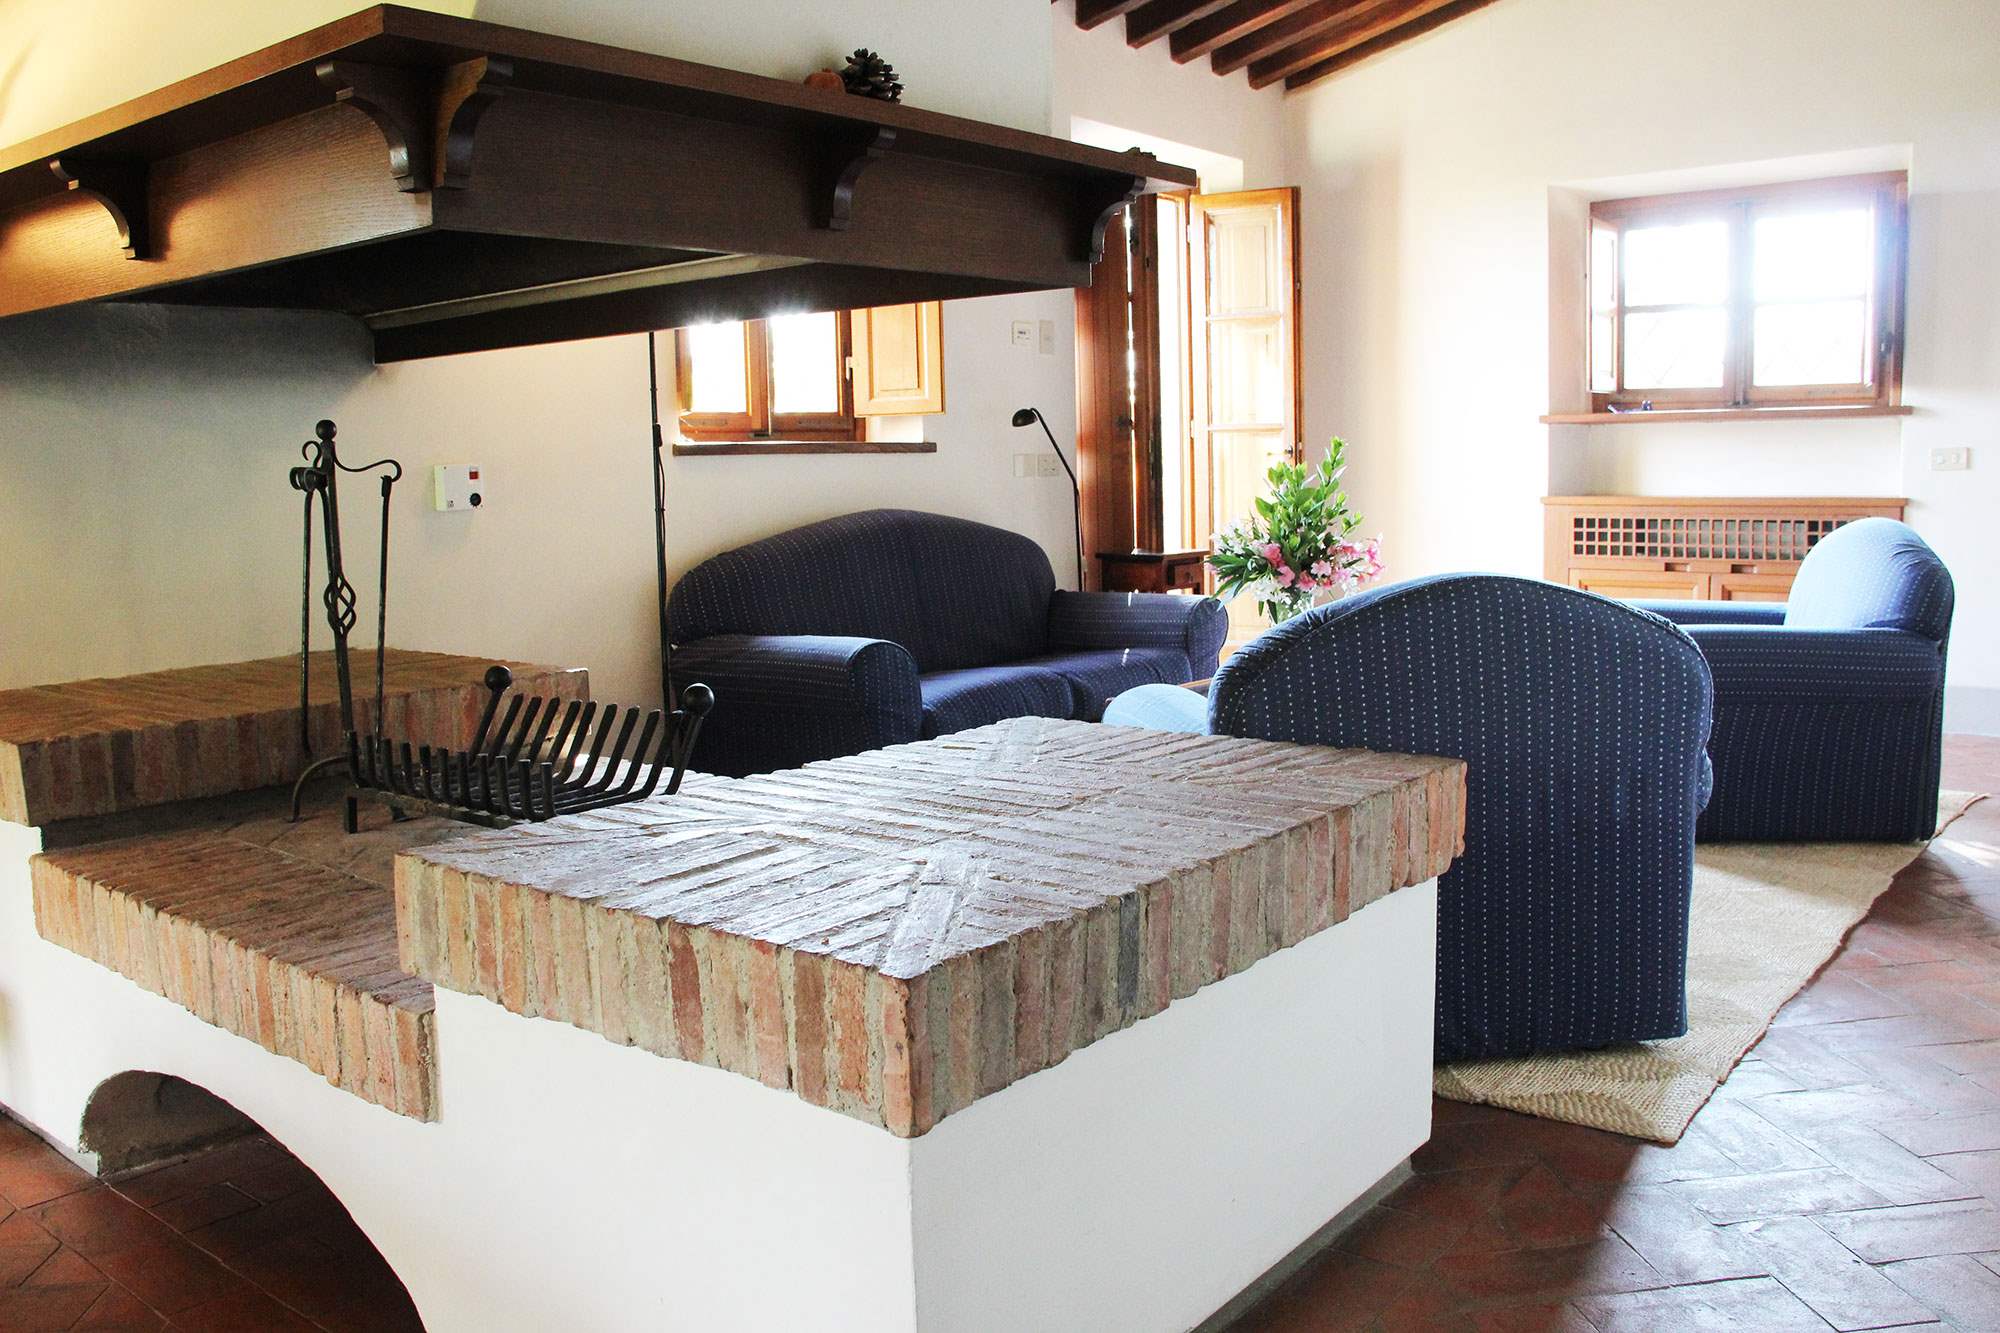 Apartment Vigna, 3 bedroom apartment in Chianti & Countryside, Tuscany Photo #6